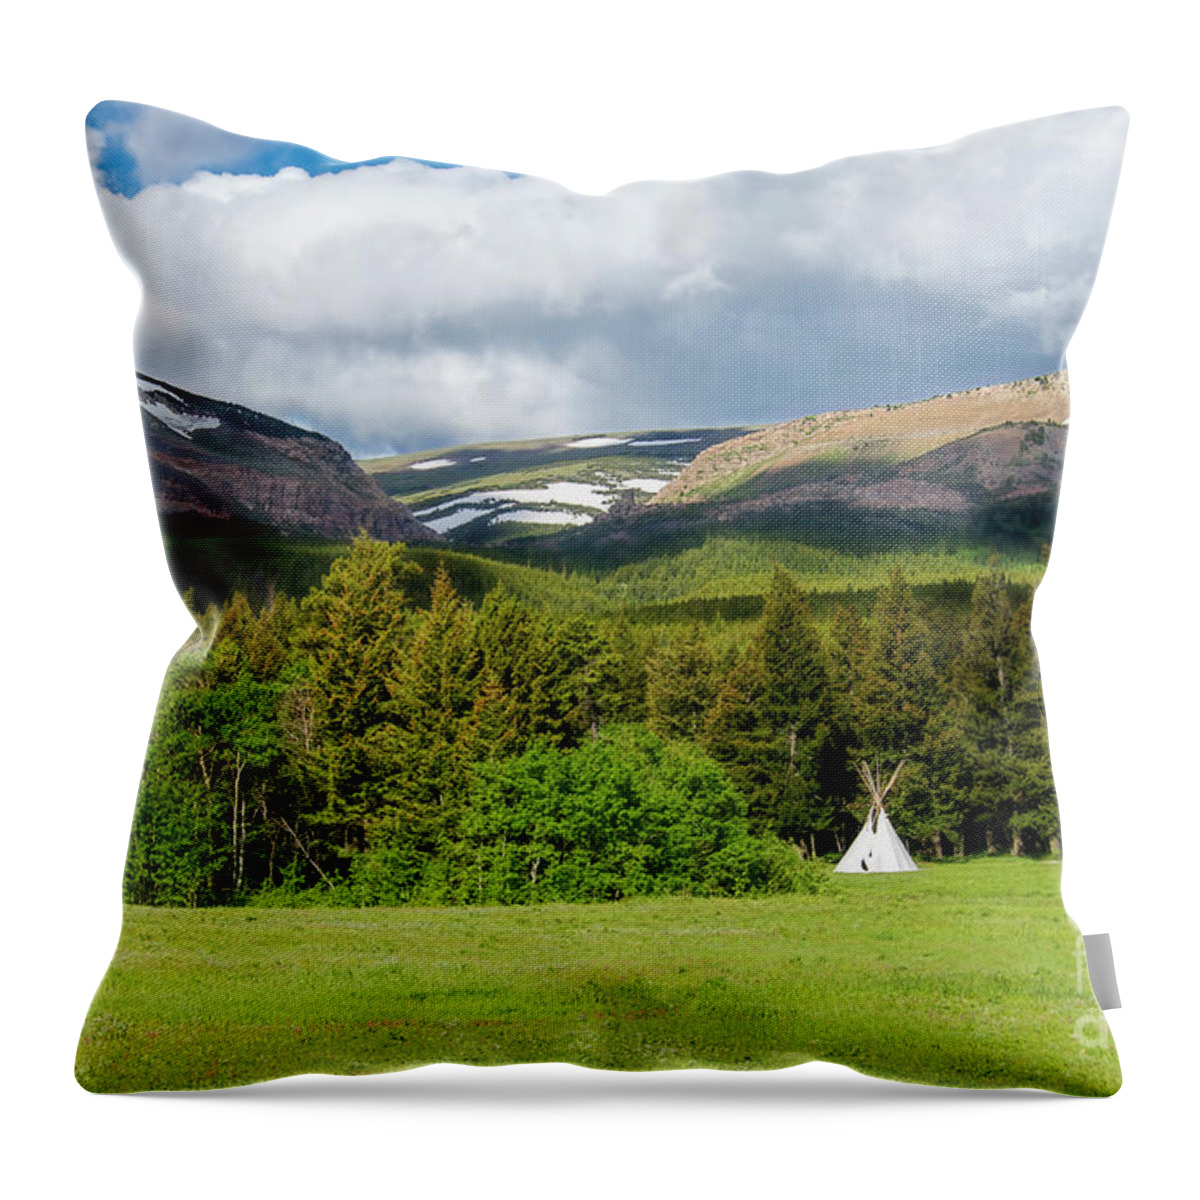 Mountains Throw Pillow featuring the photograph Mountain Teepee by David Arment